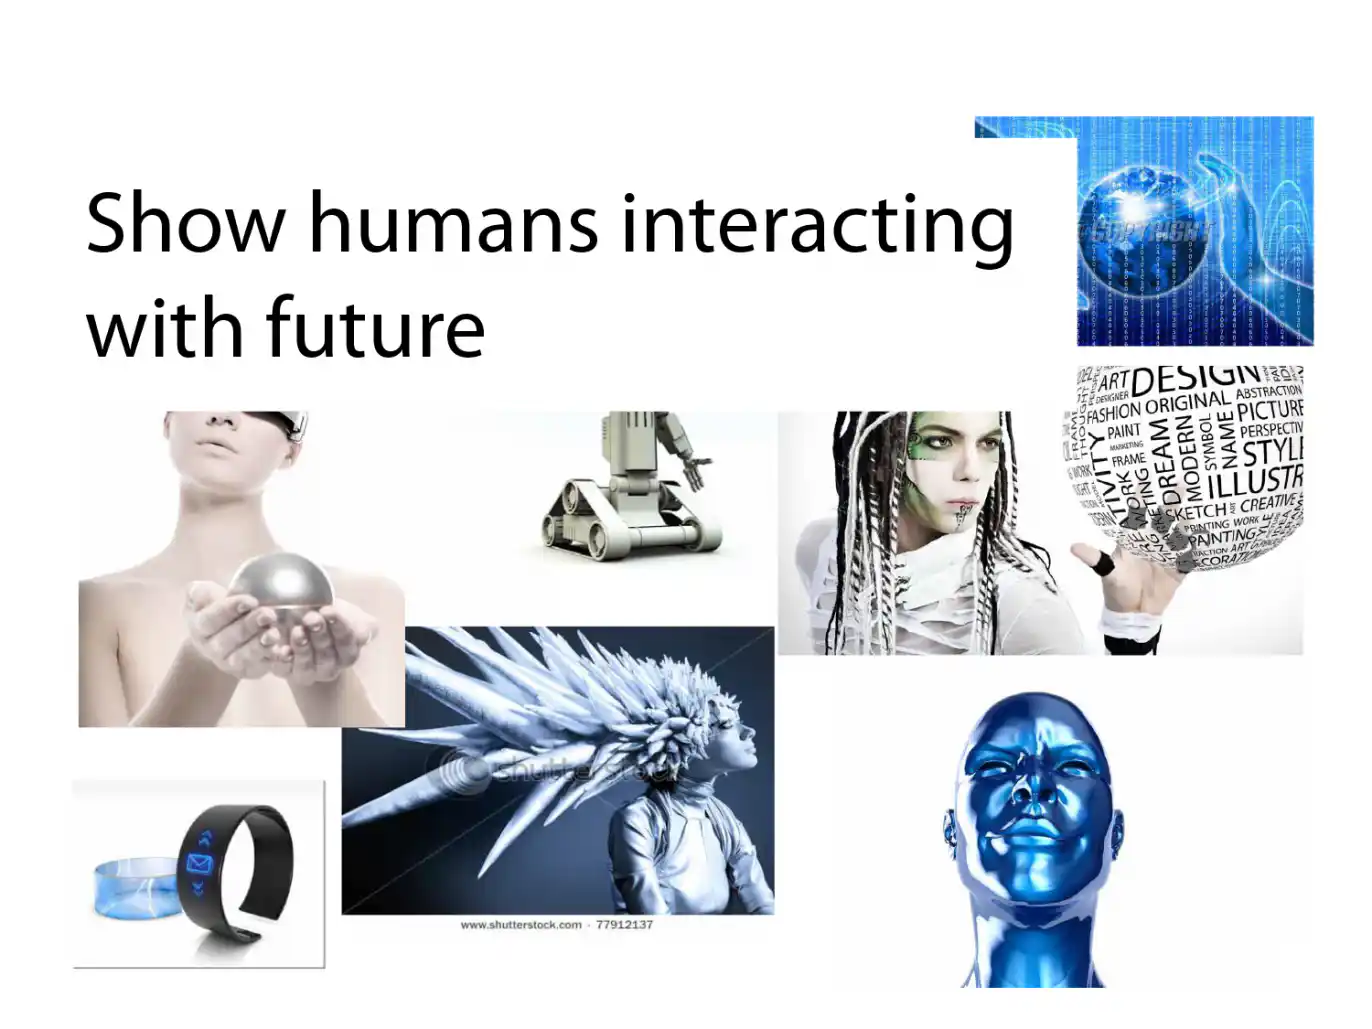 image showing humans interactign with futuristic interfaces